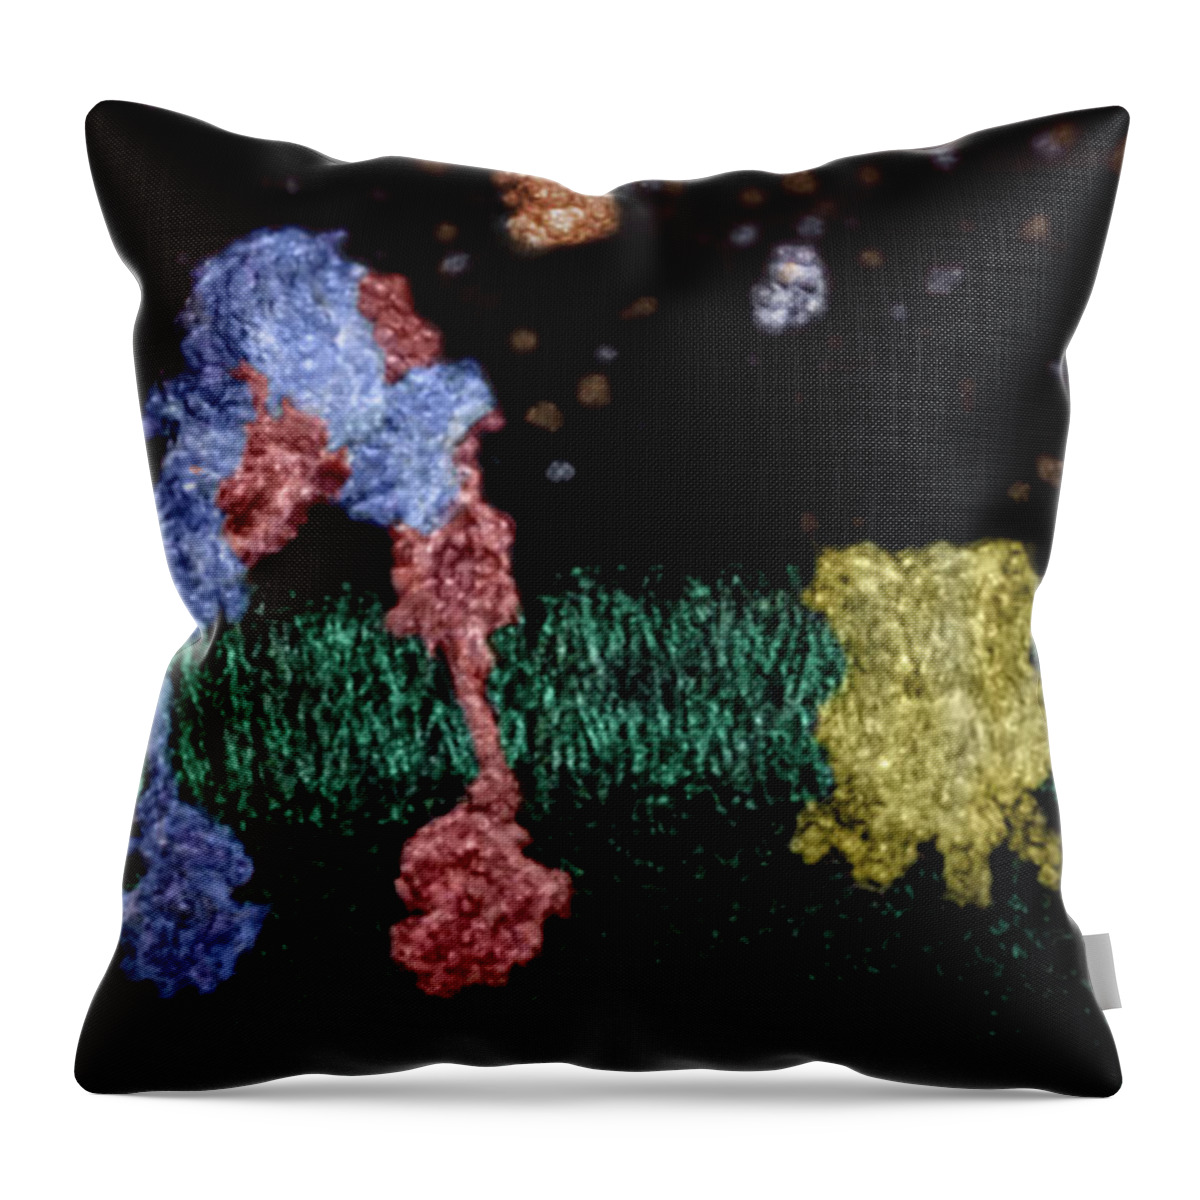 3d Model Throw Pillow featuring the photograph Glucose Transportation Into Cell, Part 1 by Anatomical Travelogue